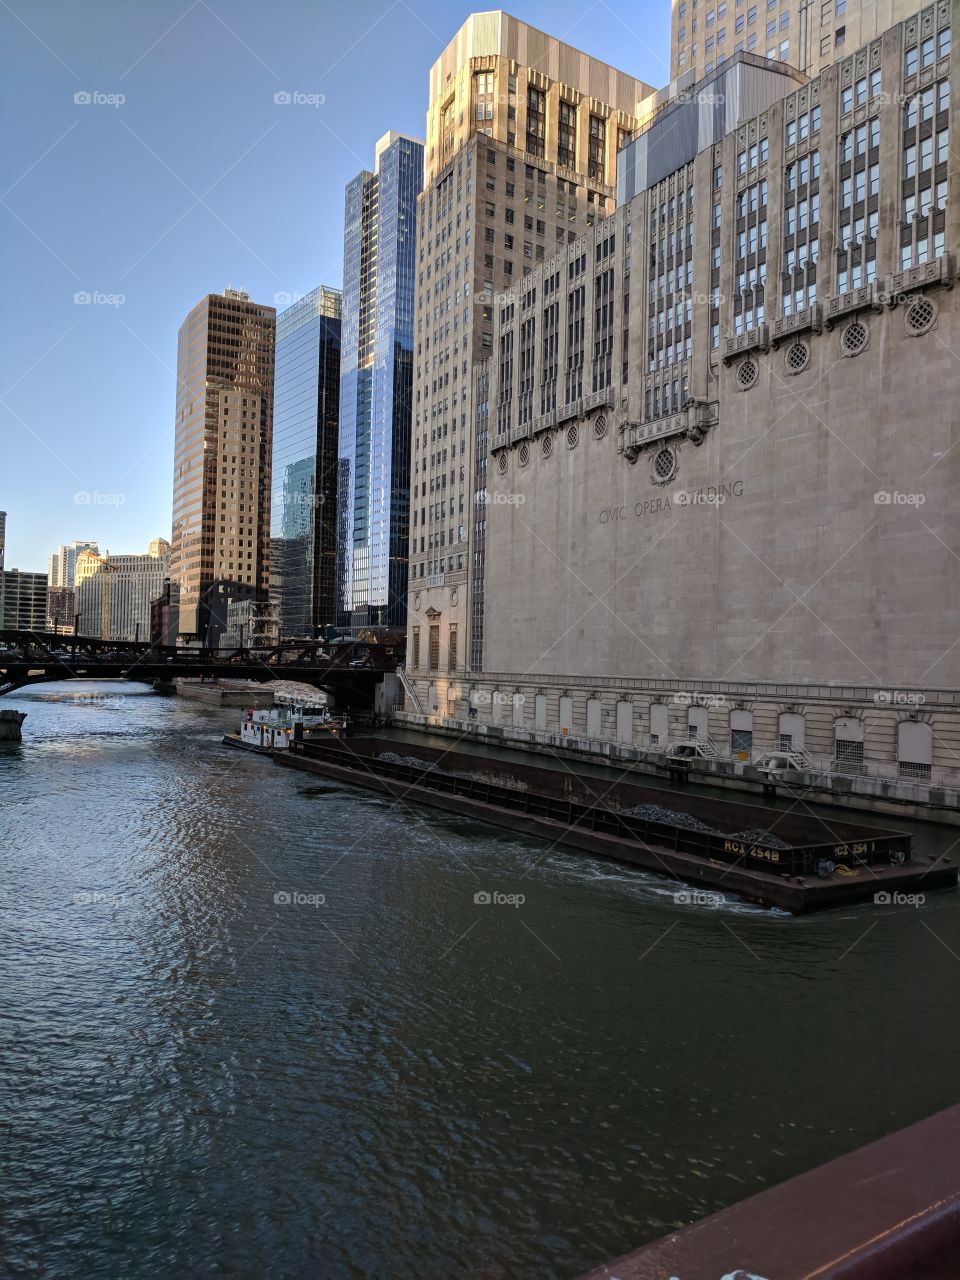 Barge on Chicago River